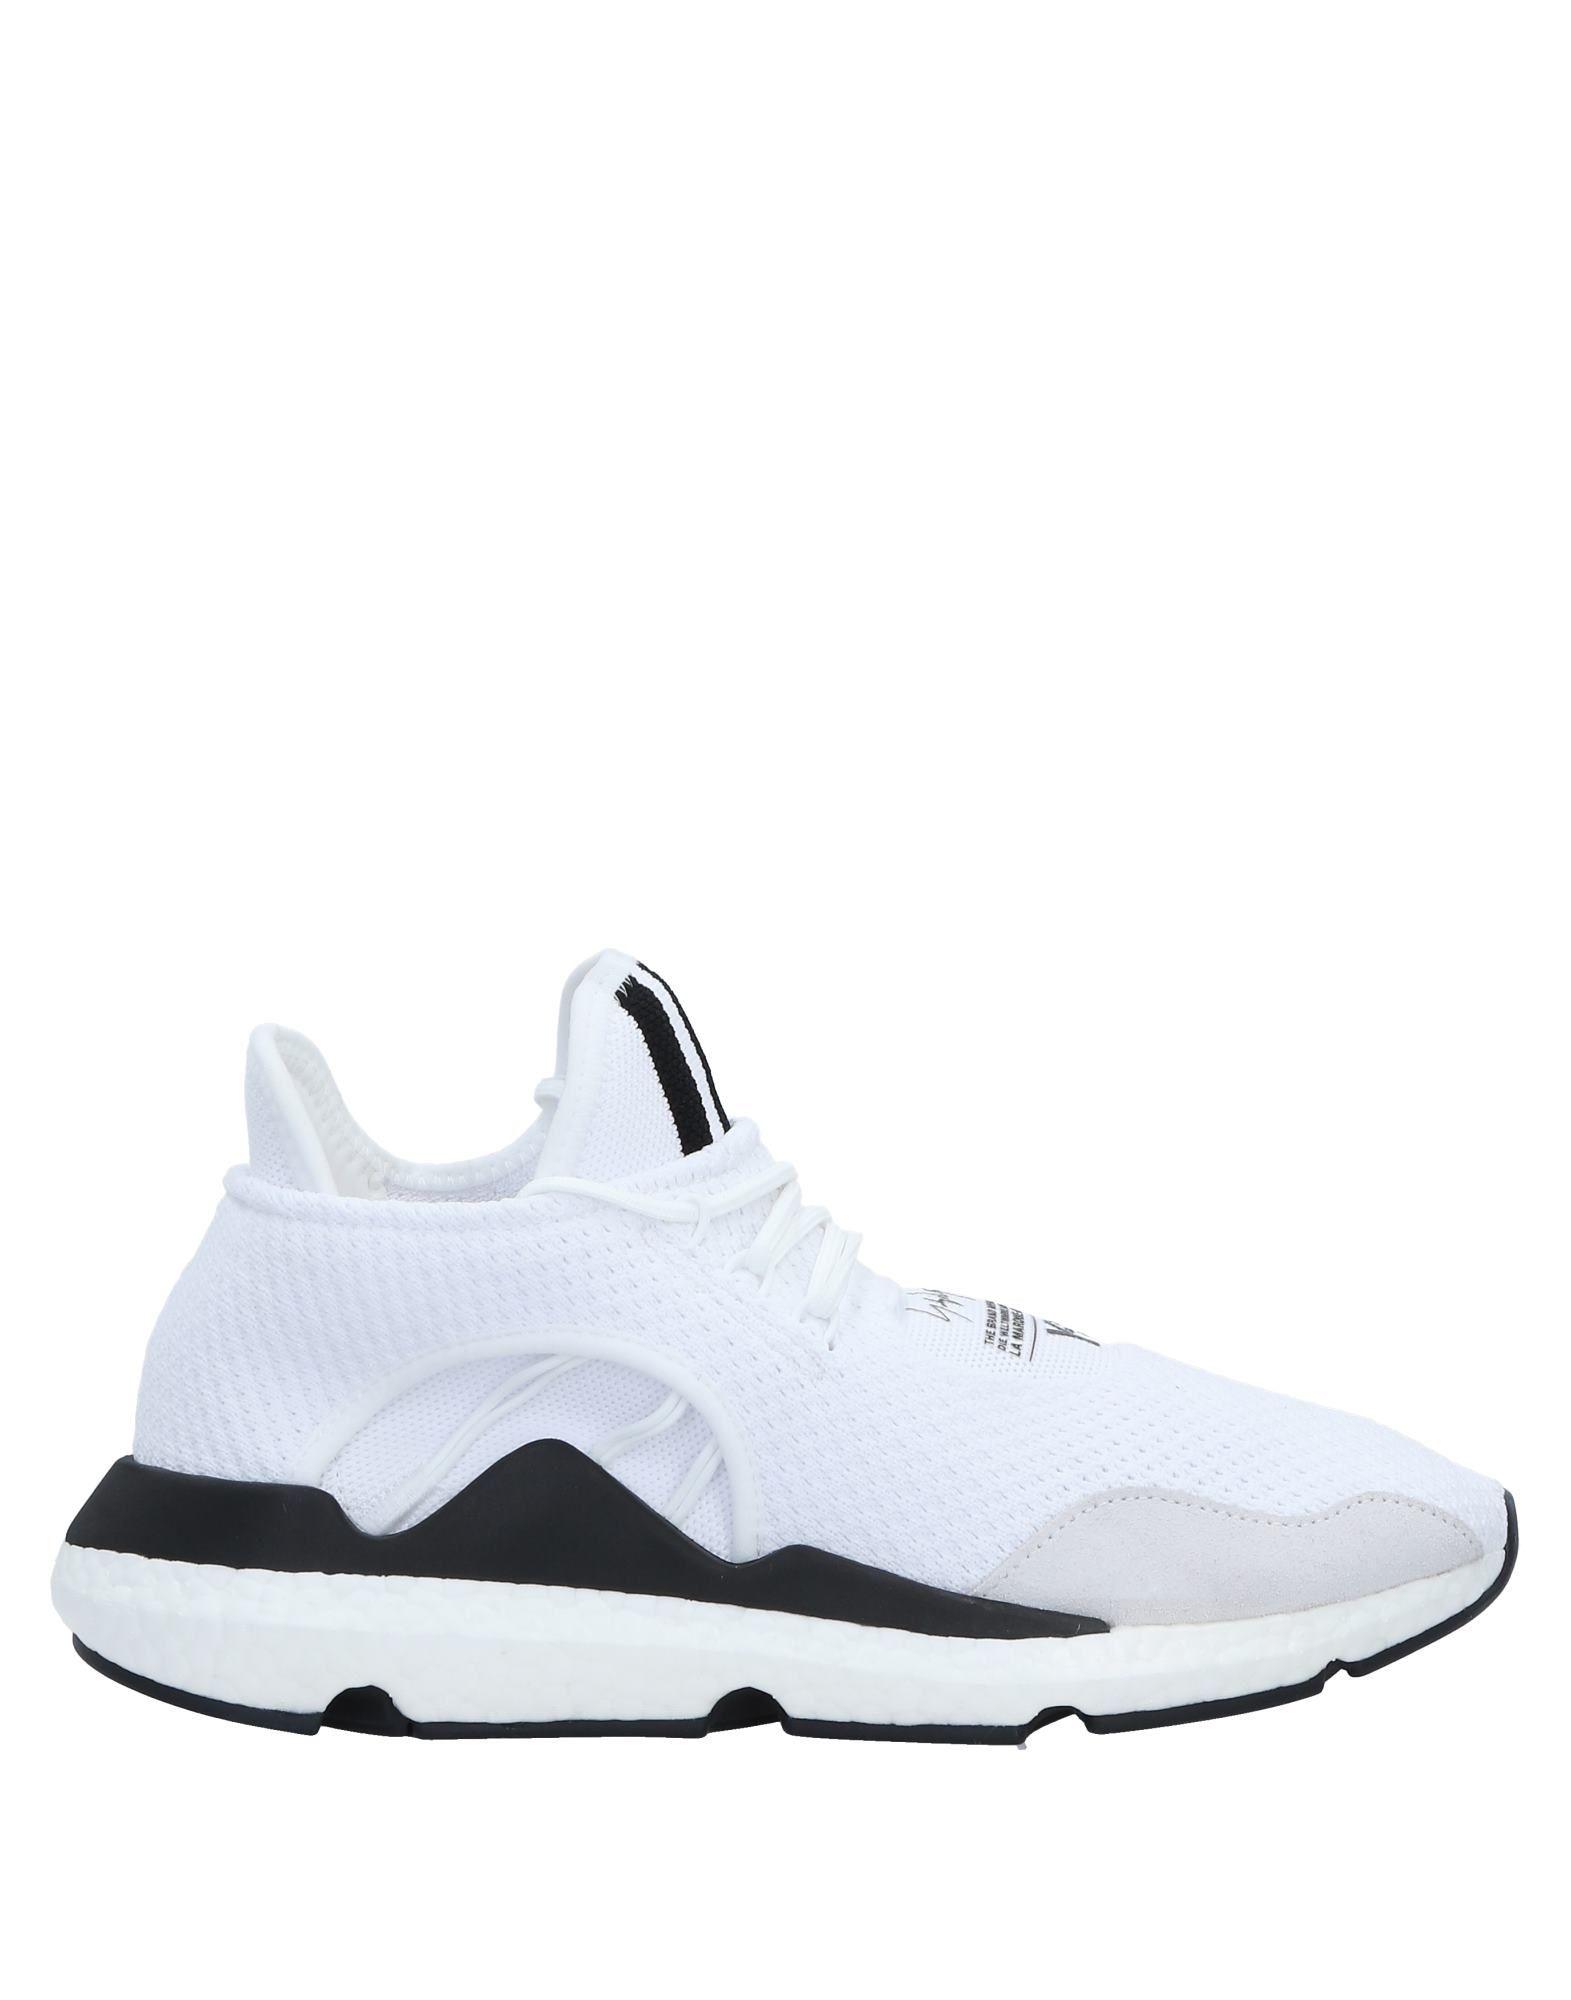 Y-3 Leather Low-tops & Sneakers in White for Men - Lyst